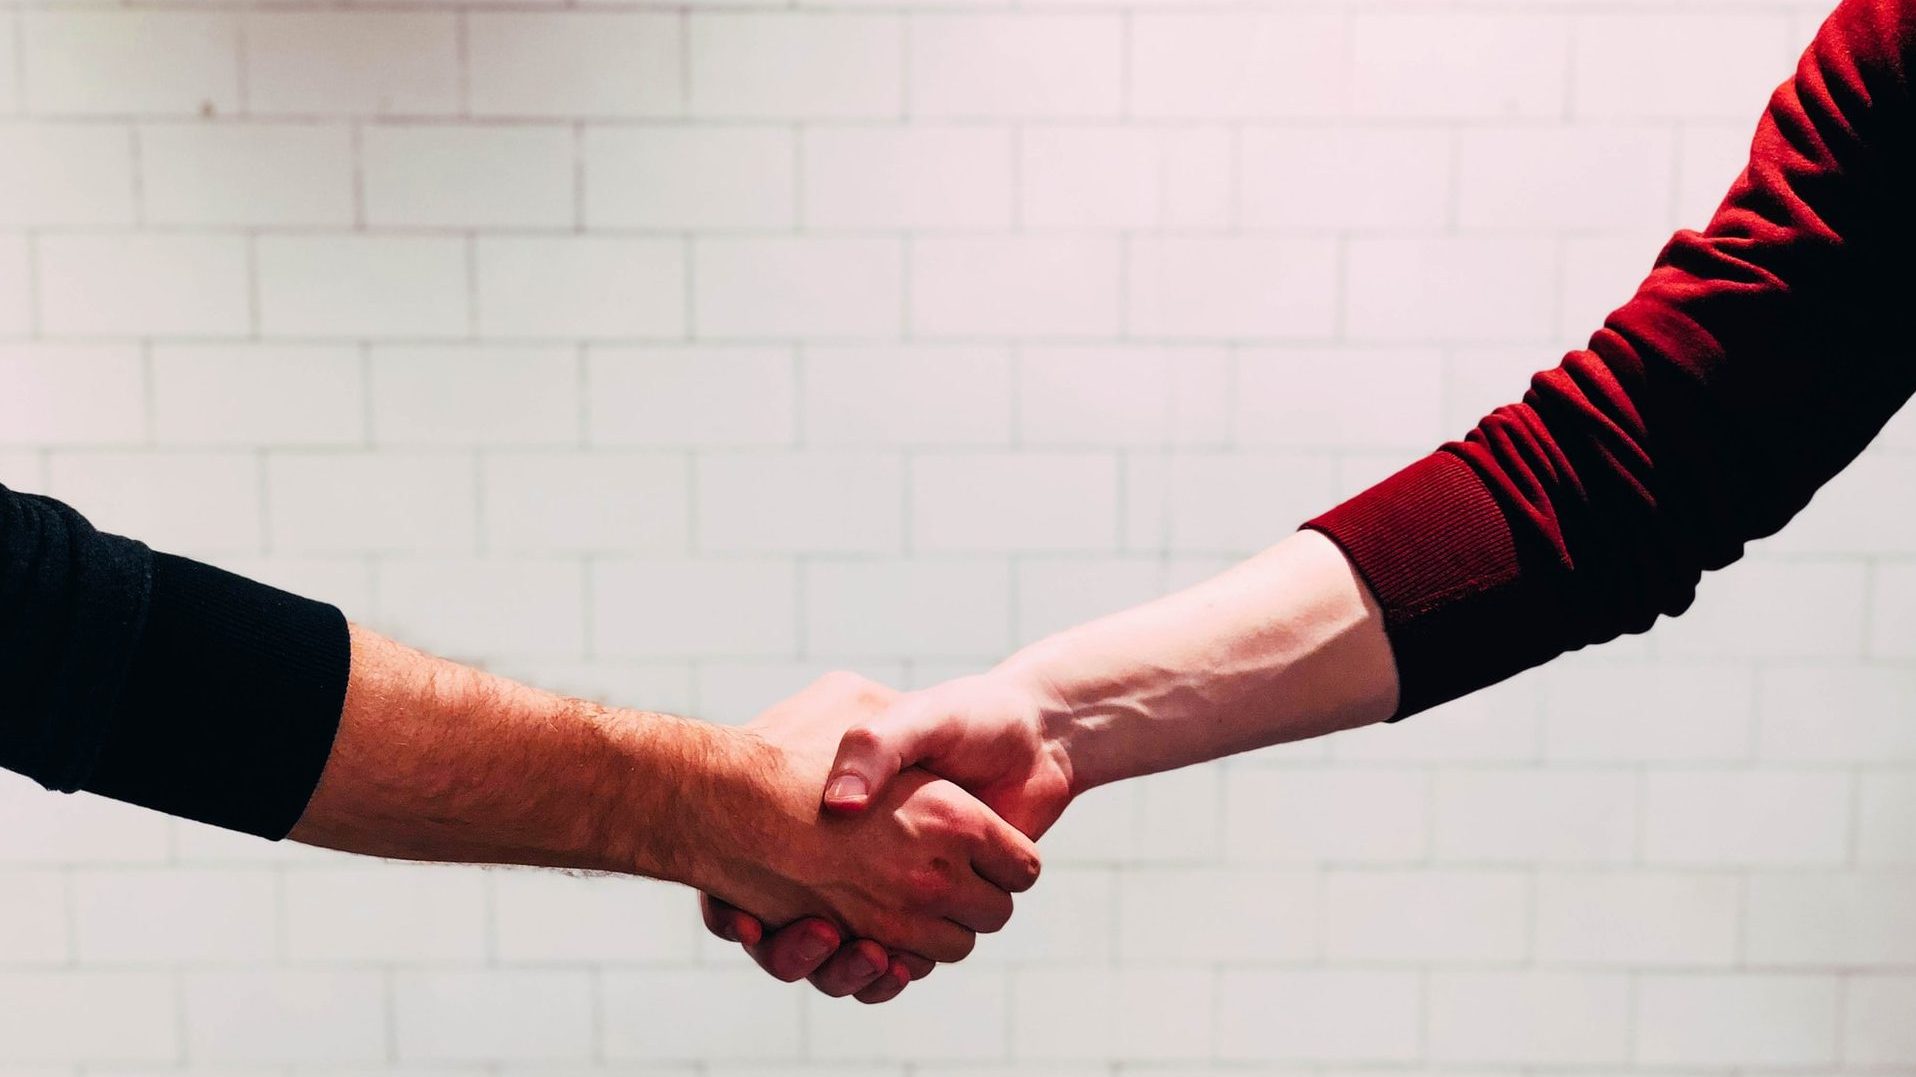 two person shaking hands near white painted wall